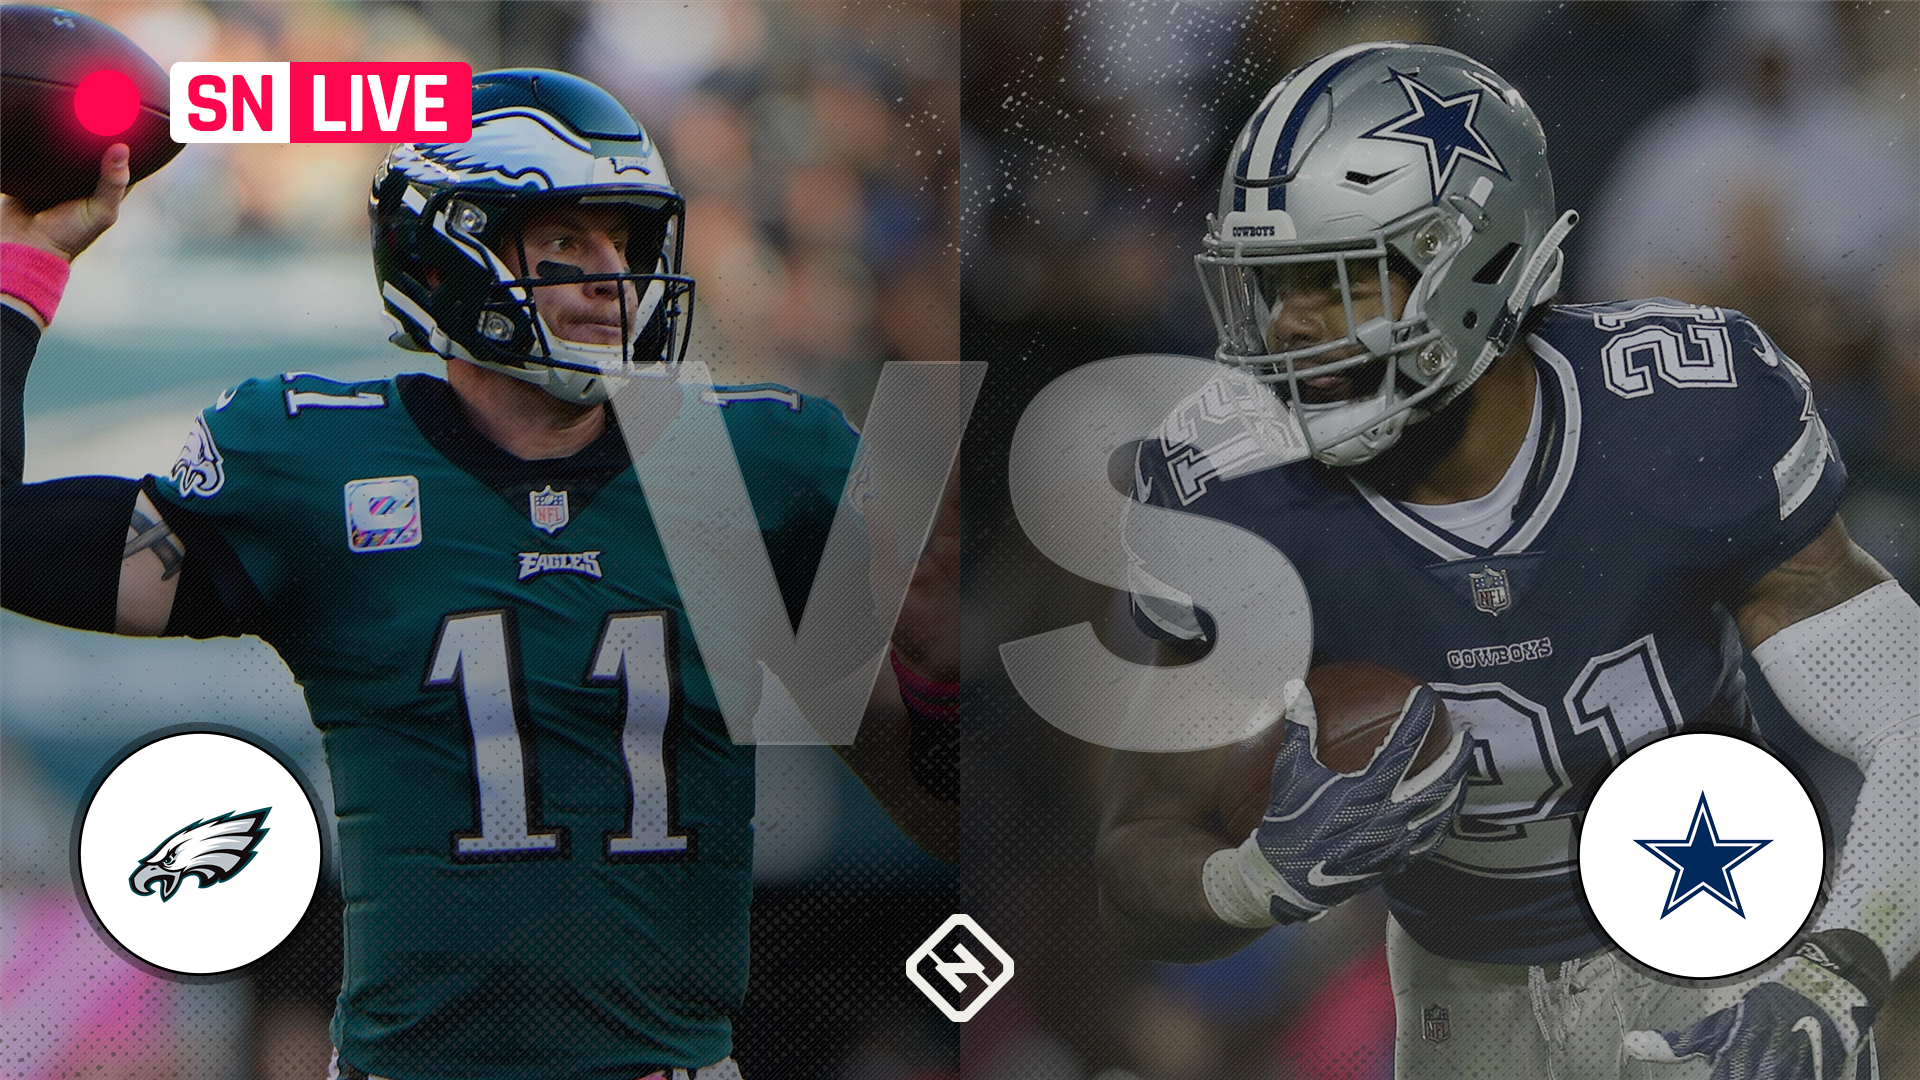 Cowboys vs. Eagles: Score, live updates from Sunday night game | NFL | Sporting News